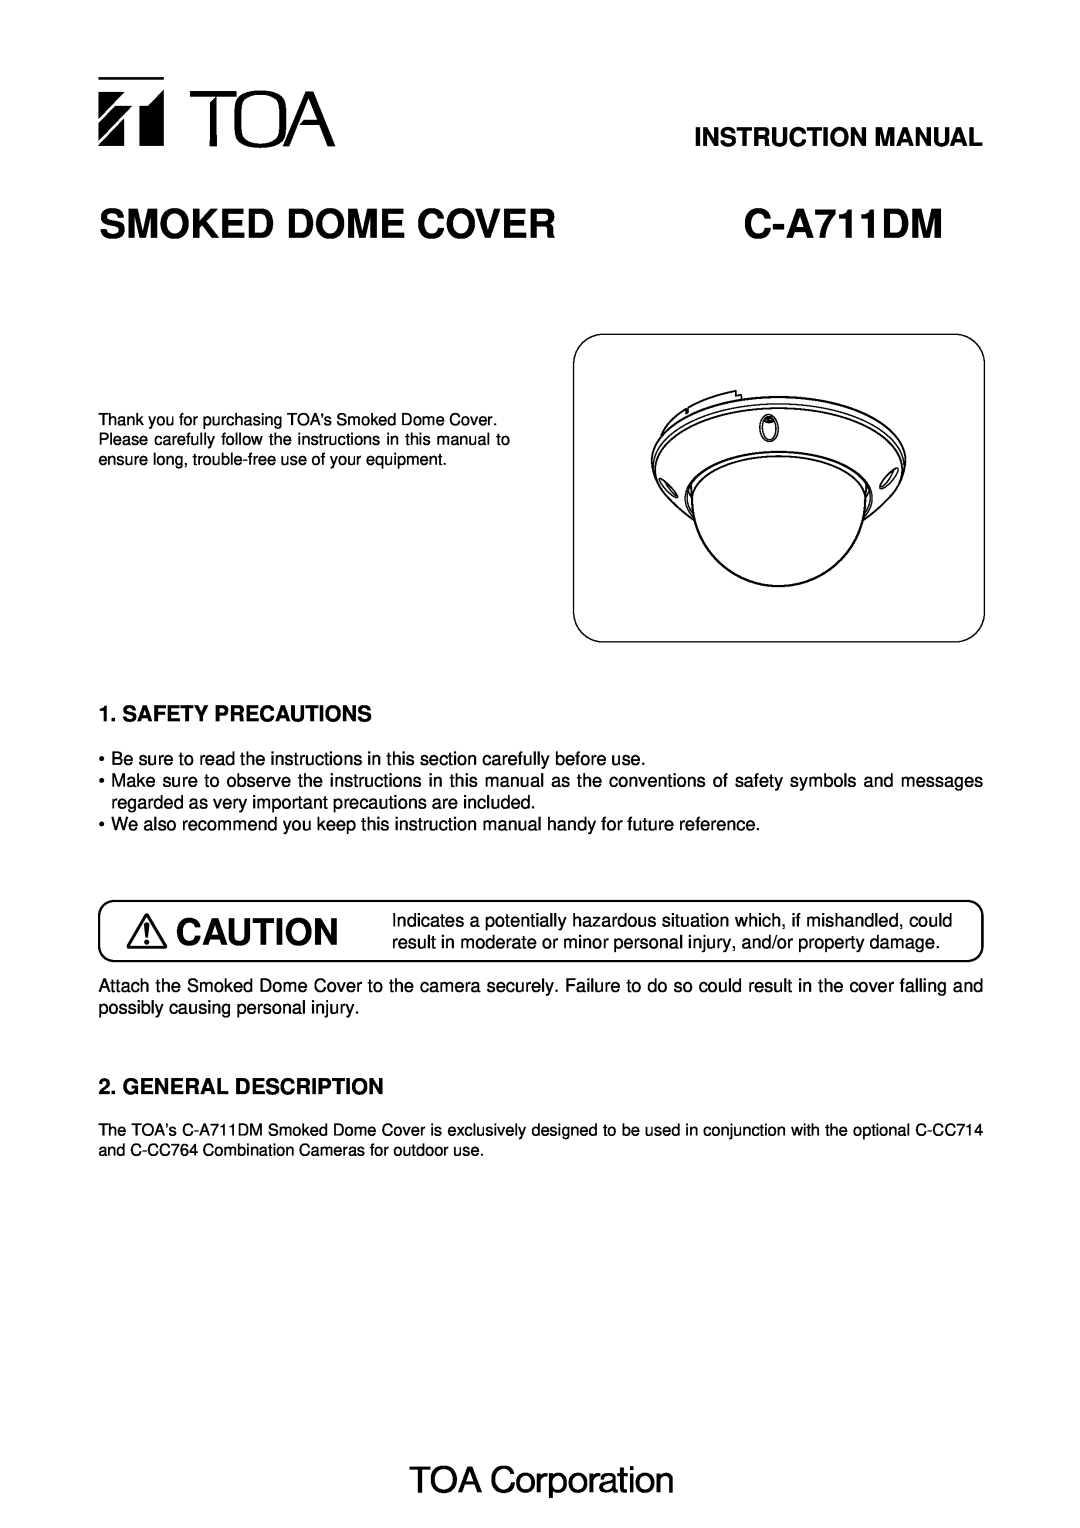 TOA Electronics C-A711DM instruction manual Safety Precautions, General Description, Smoked Dome Cover 